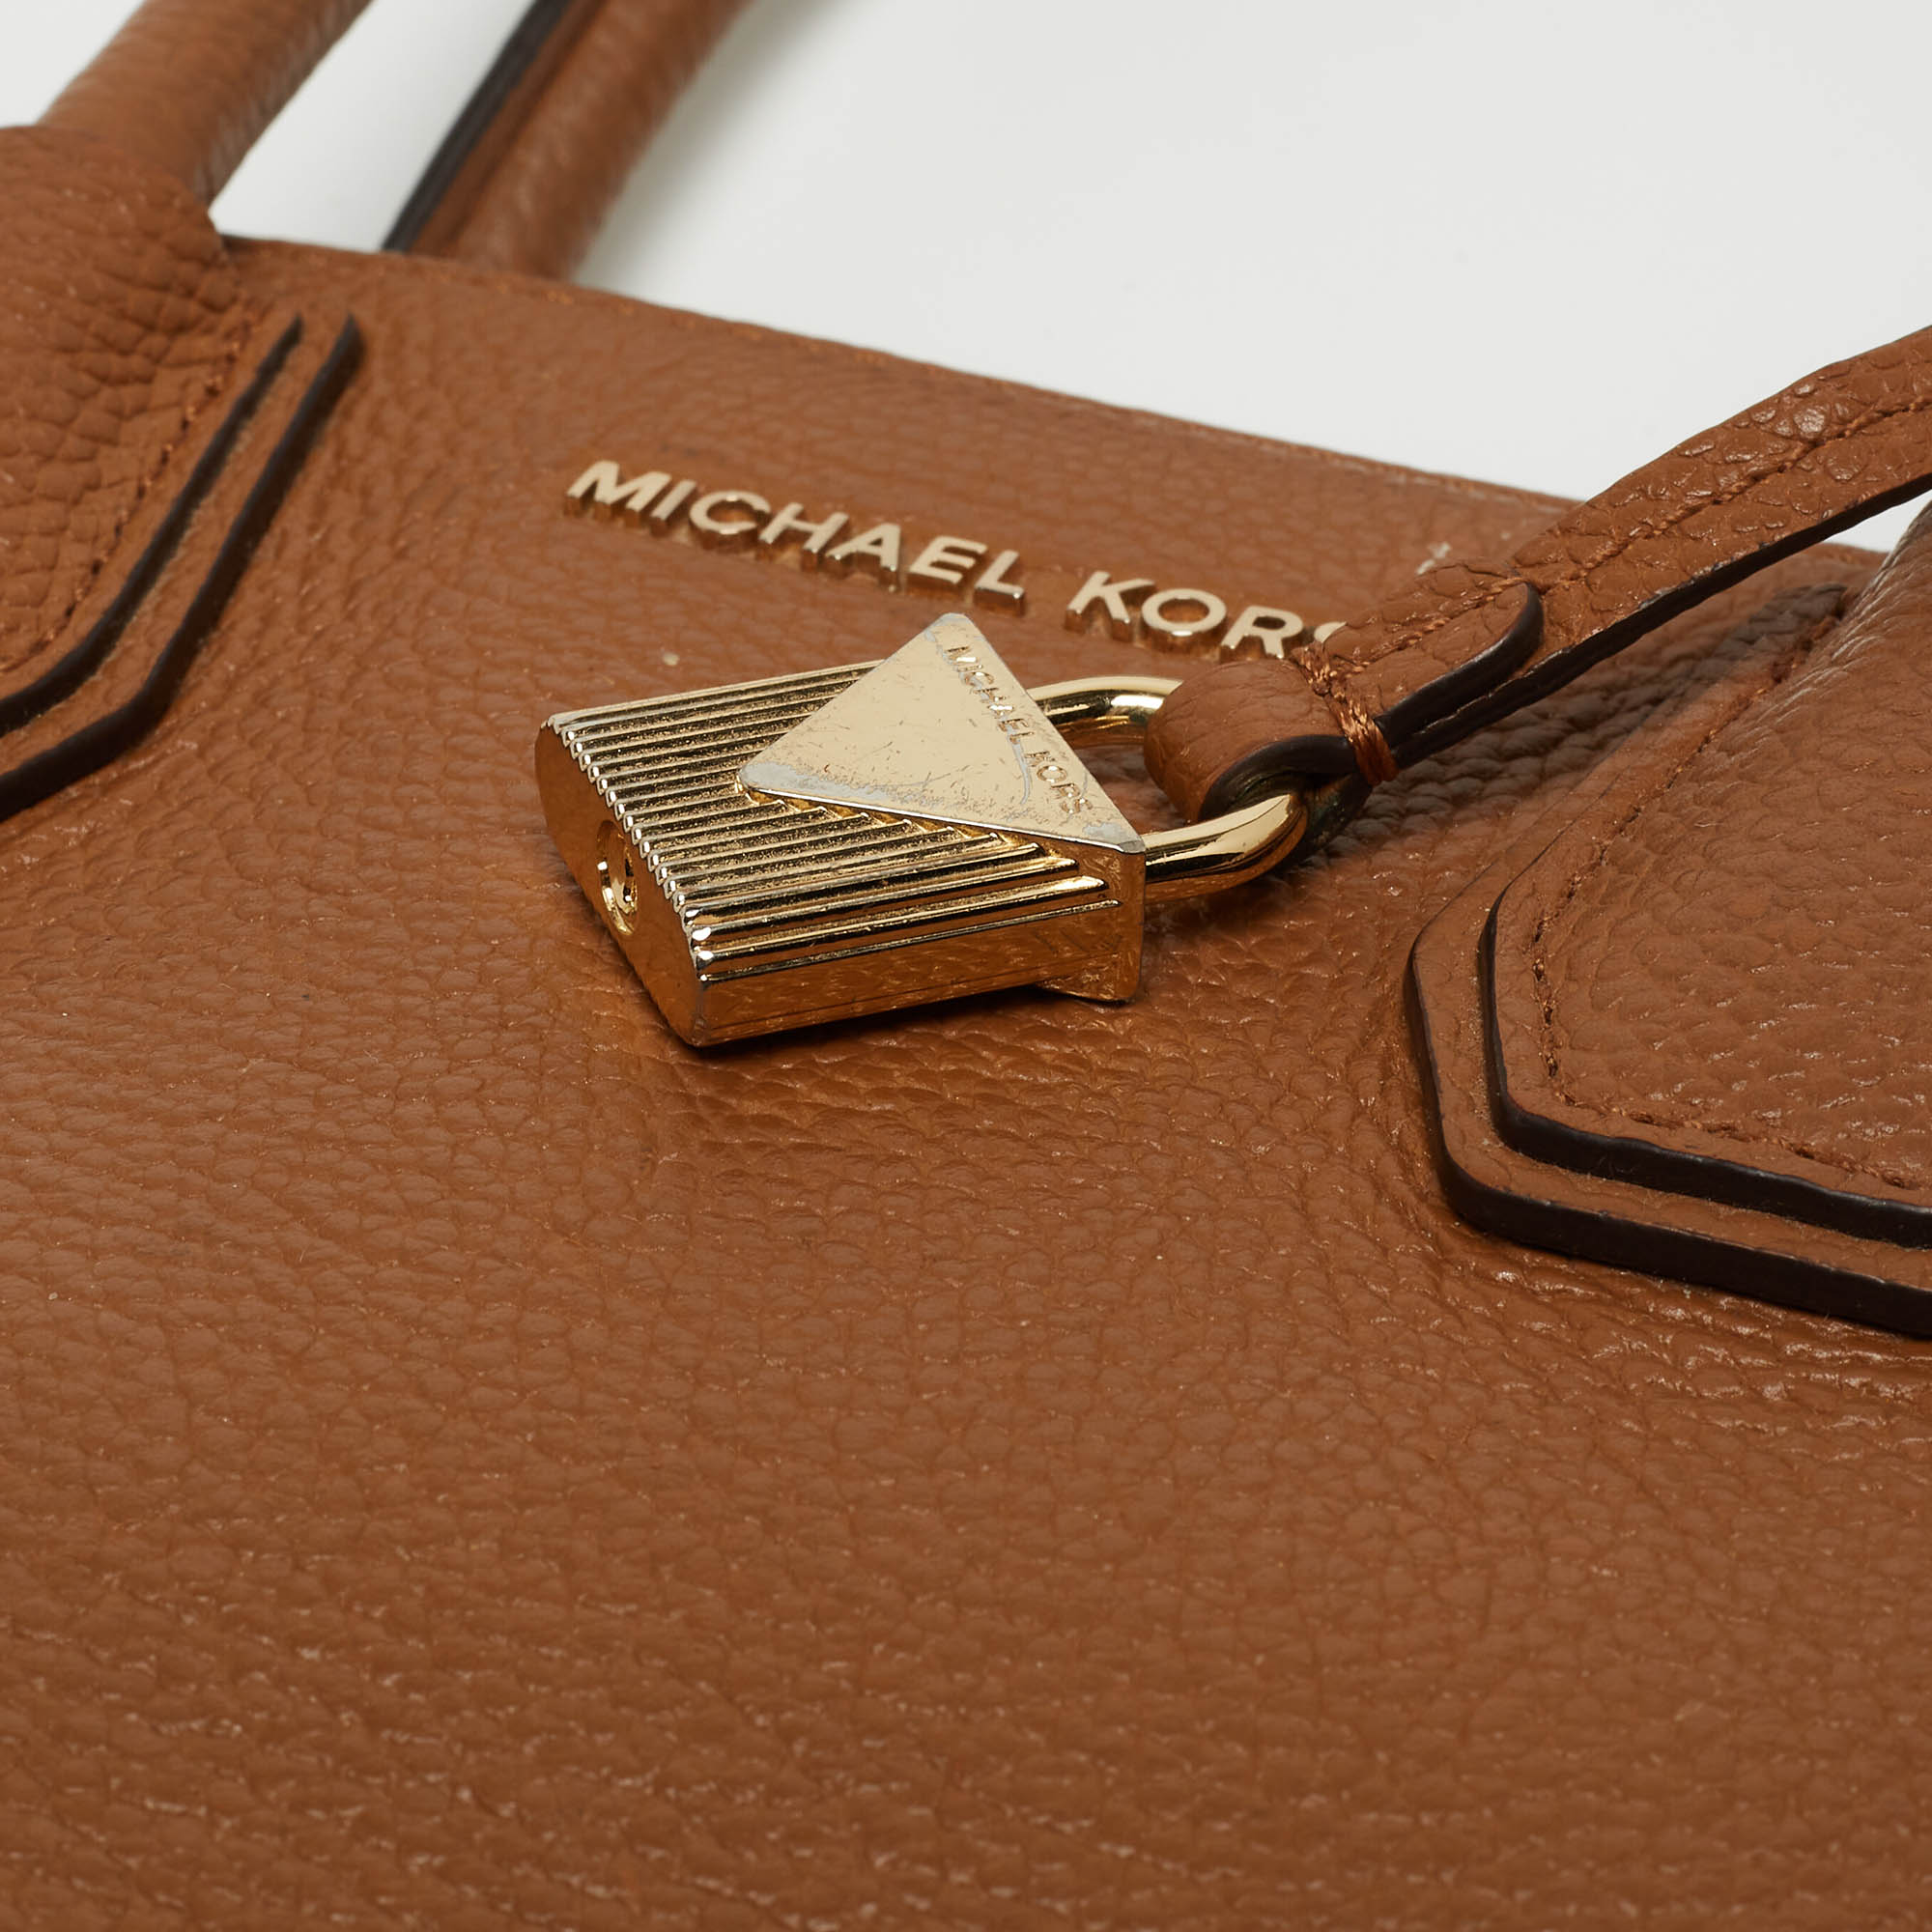 Michael Kors Brown Leather Small Mercer Tote